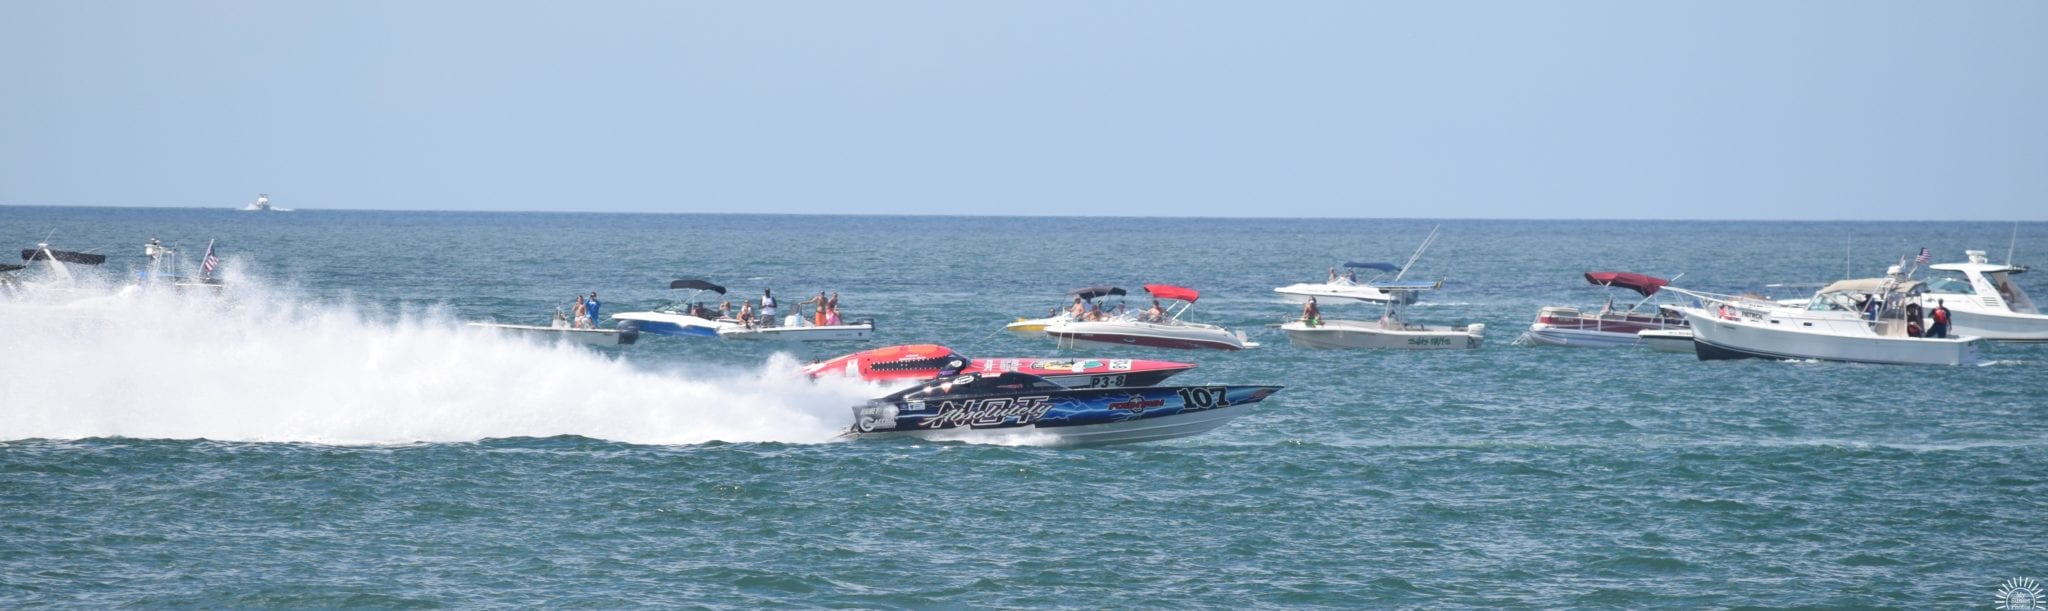 The Bright House 2014 Clearwater Super Boat Championship